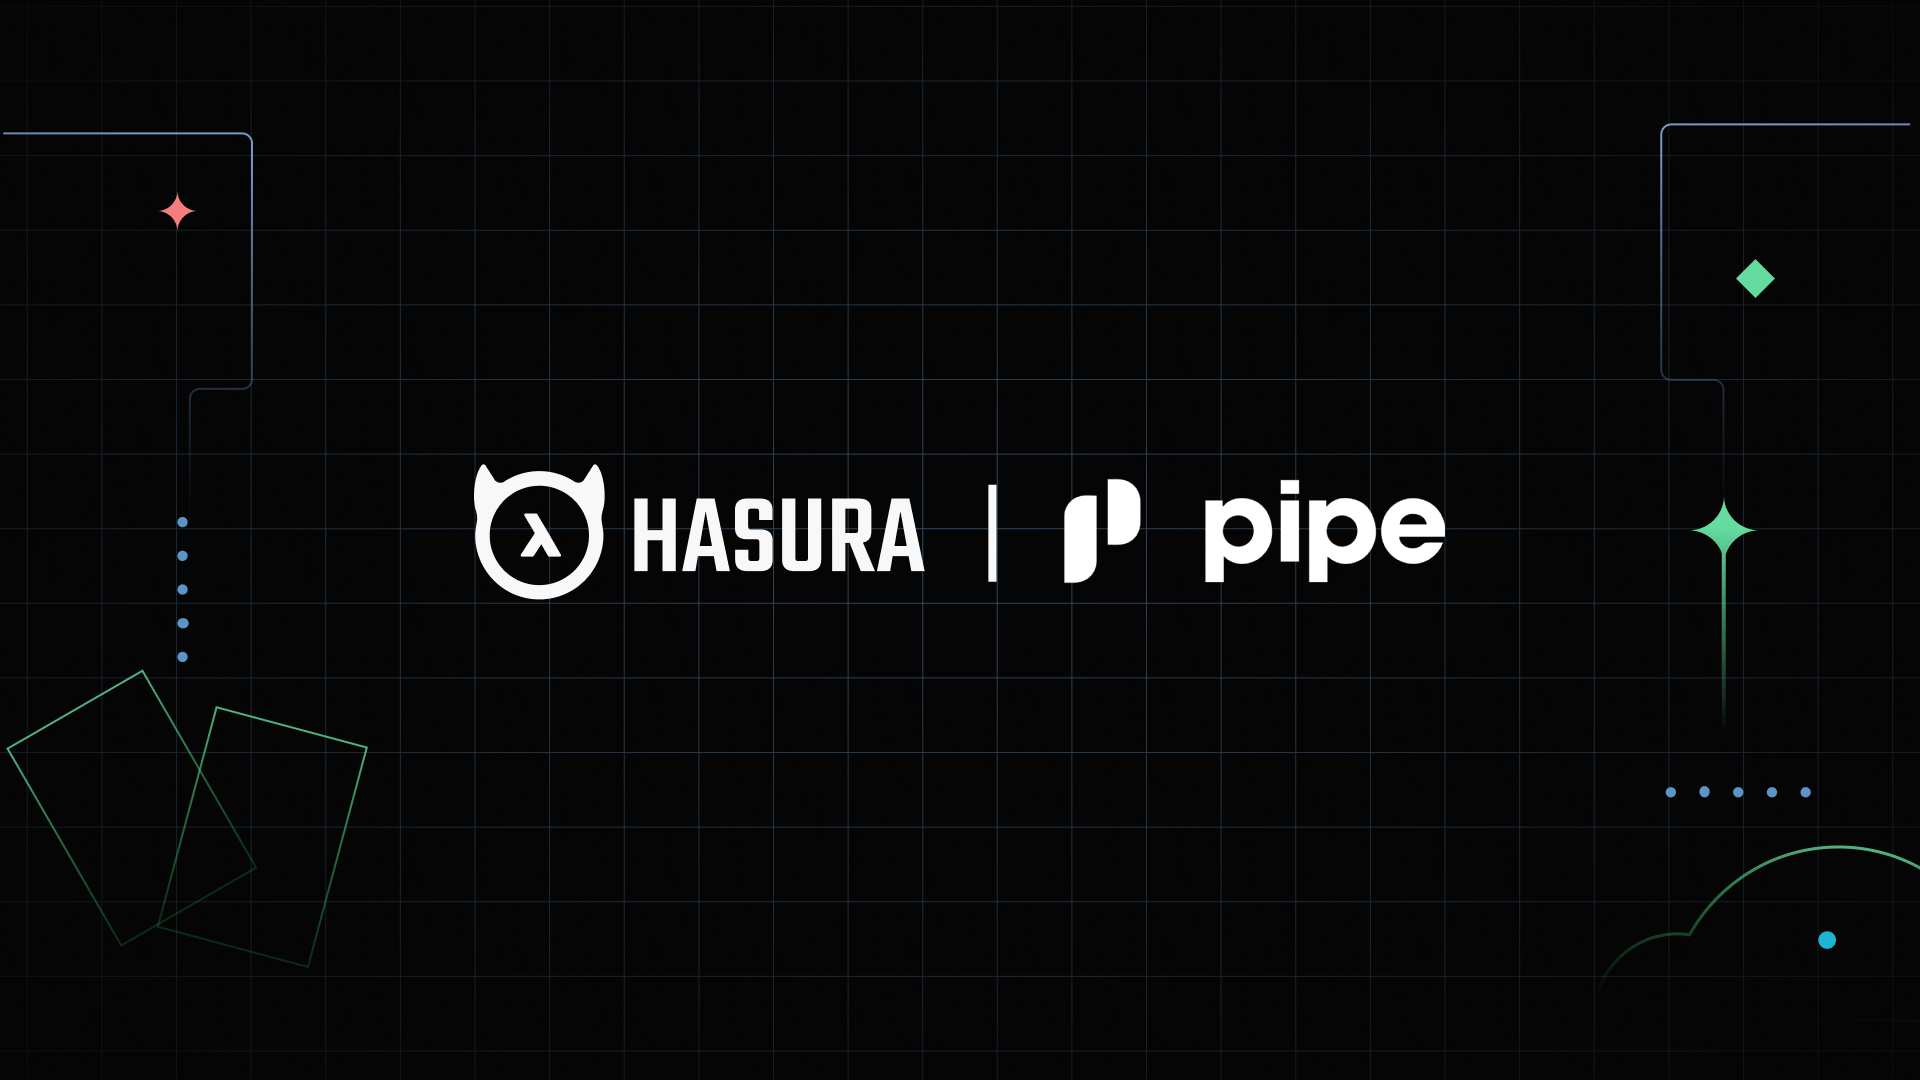 10 months, 11 engineers, 3000 customers & $1B in tradable ARR - How Pipe is using Hasura